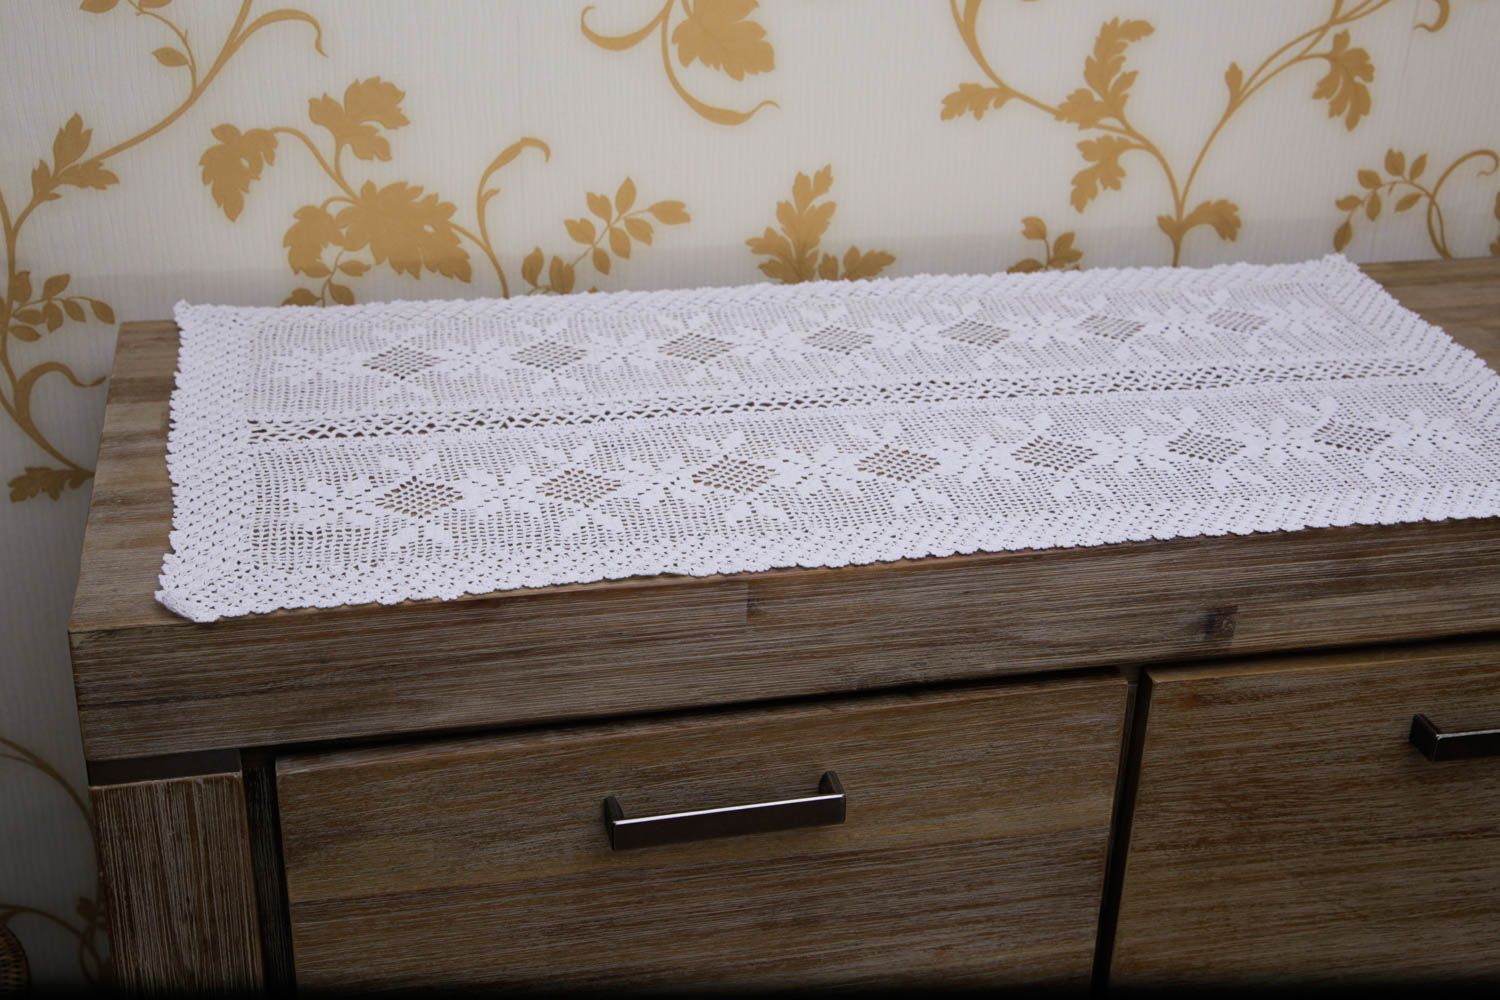 Table runner cloth runner table decoration runner for table home textiles photo 3